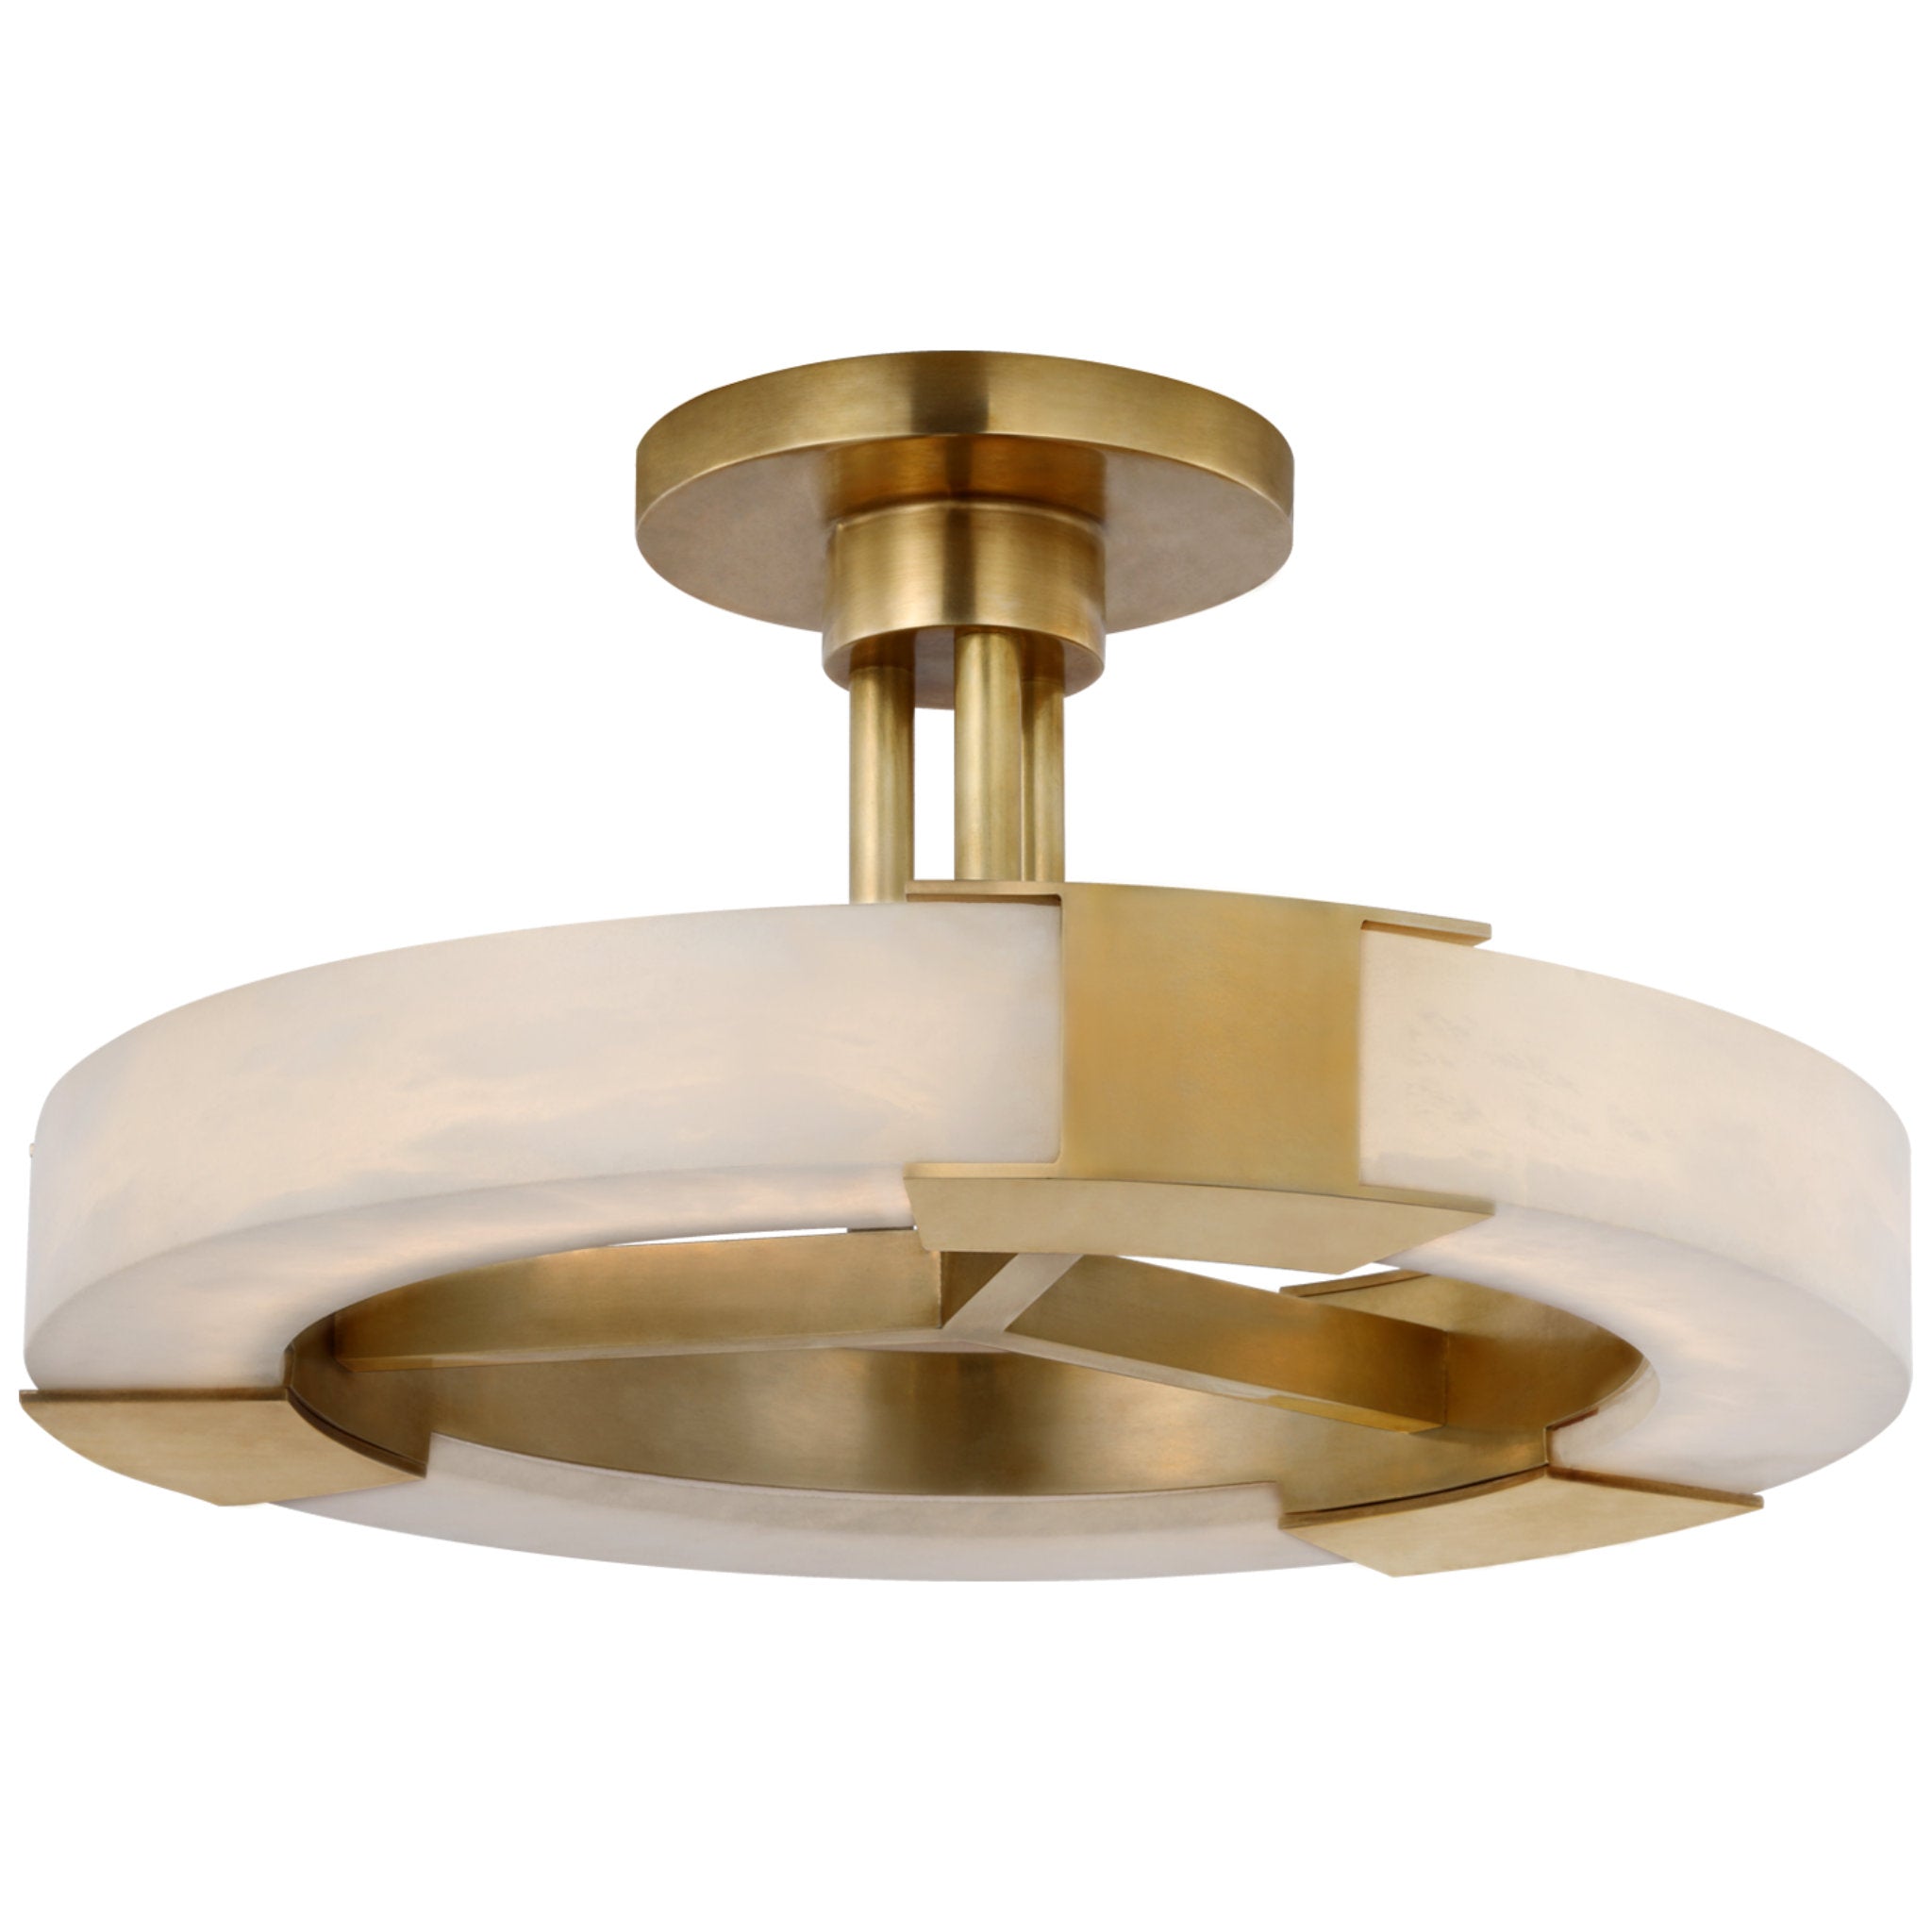 KW5012ABQ by Visual Comfort - Halcyon Large Three Tier Chandelier in  Antique-Burnished Brass with Quartz